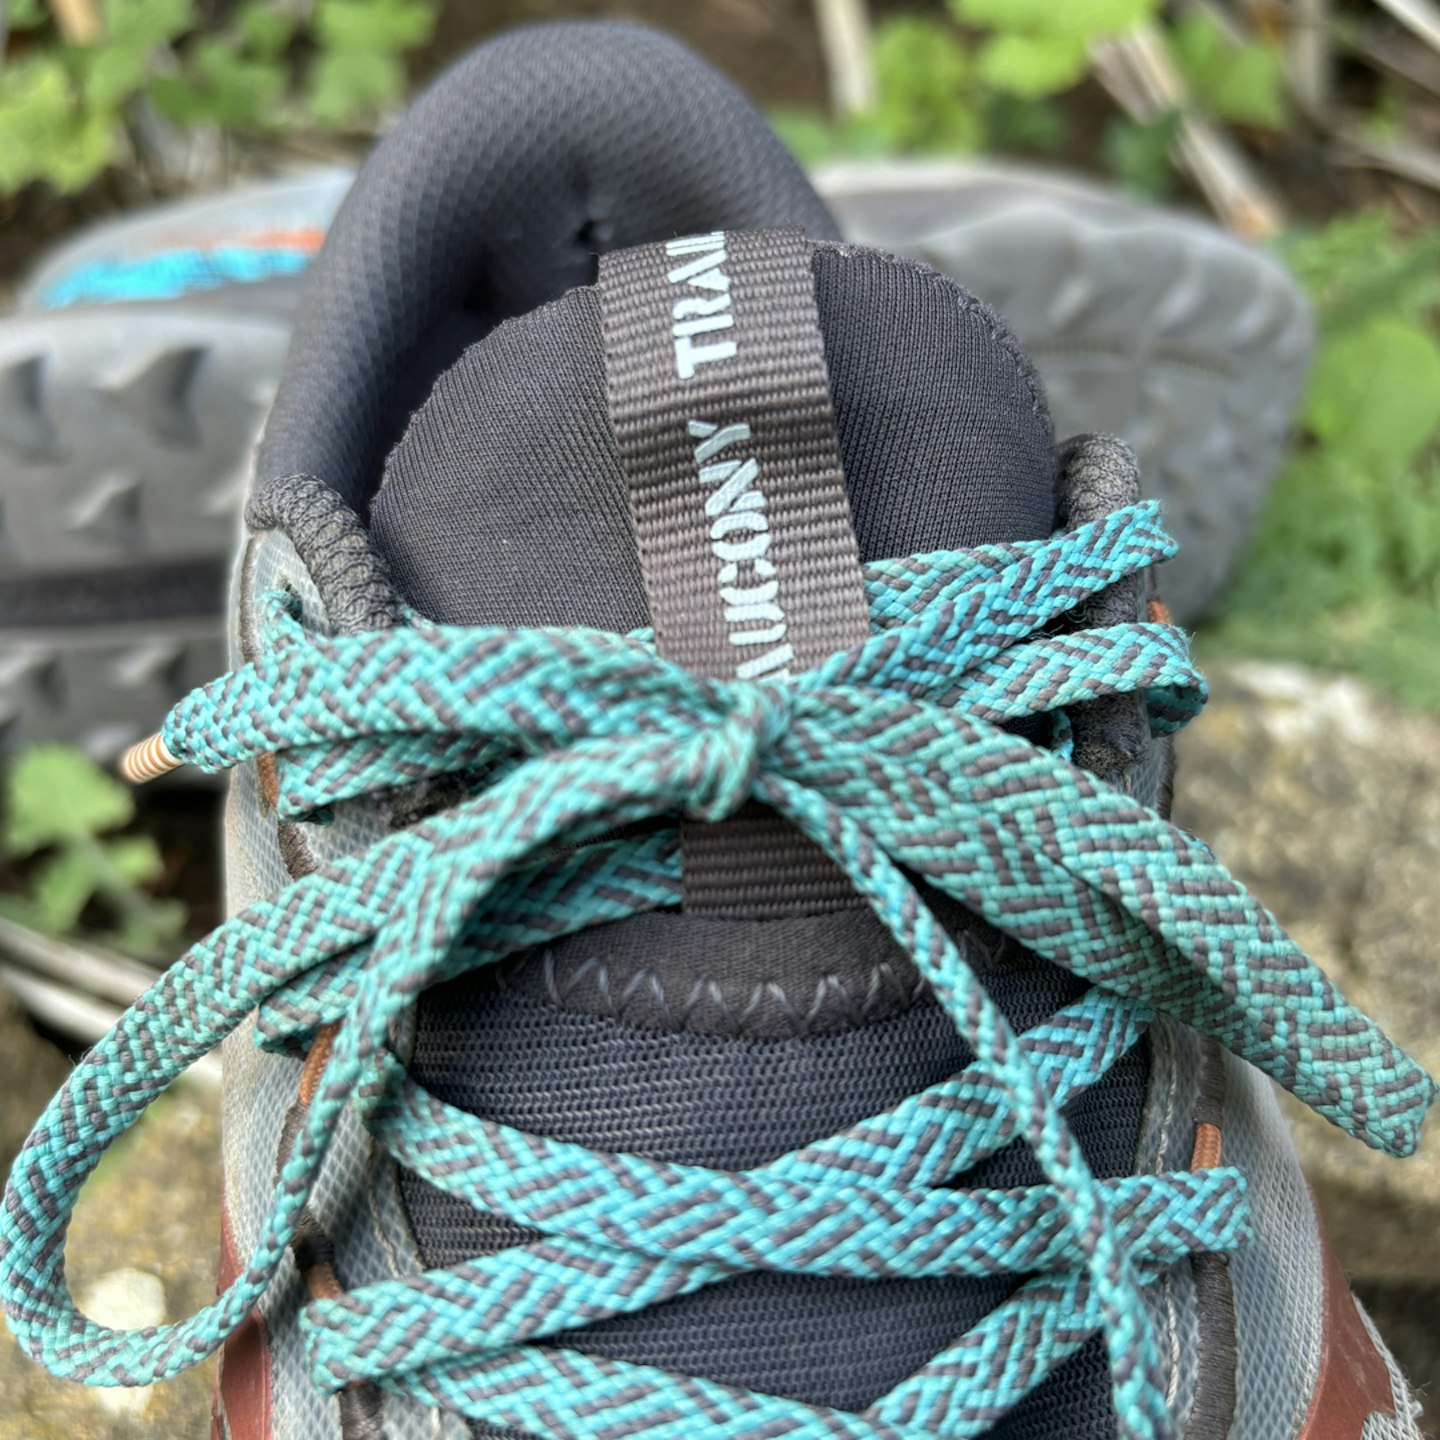 Saucony xodus ultra trail running shoes laces and tongue